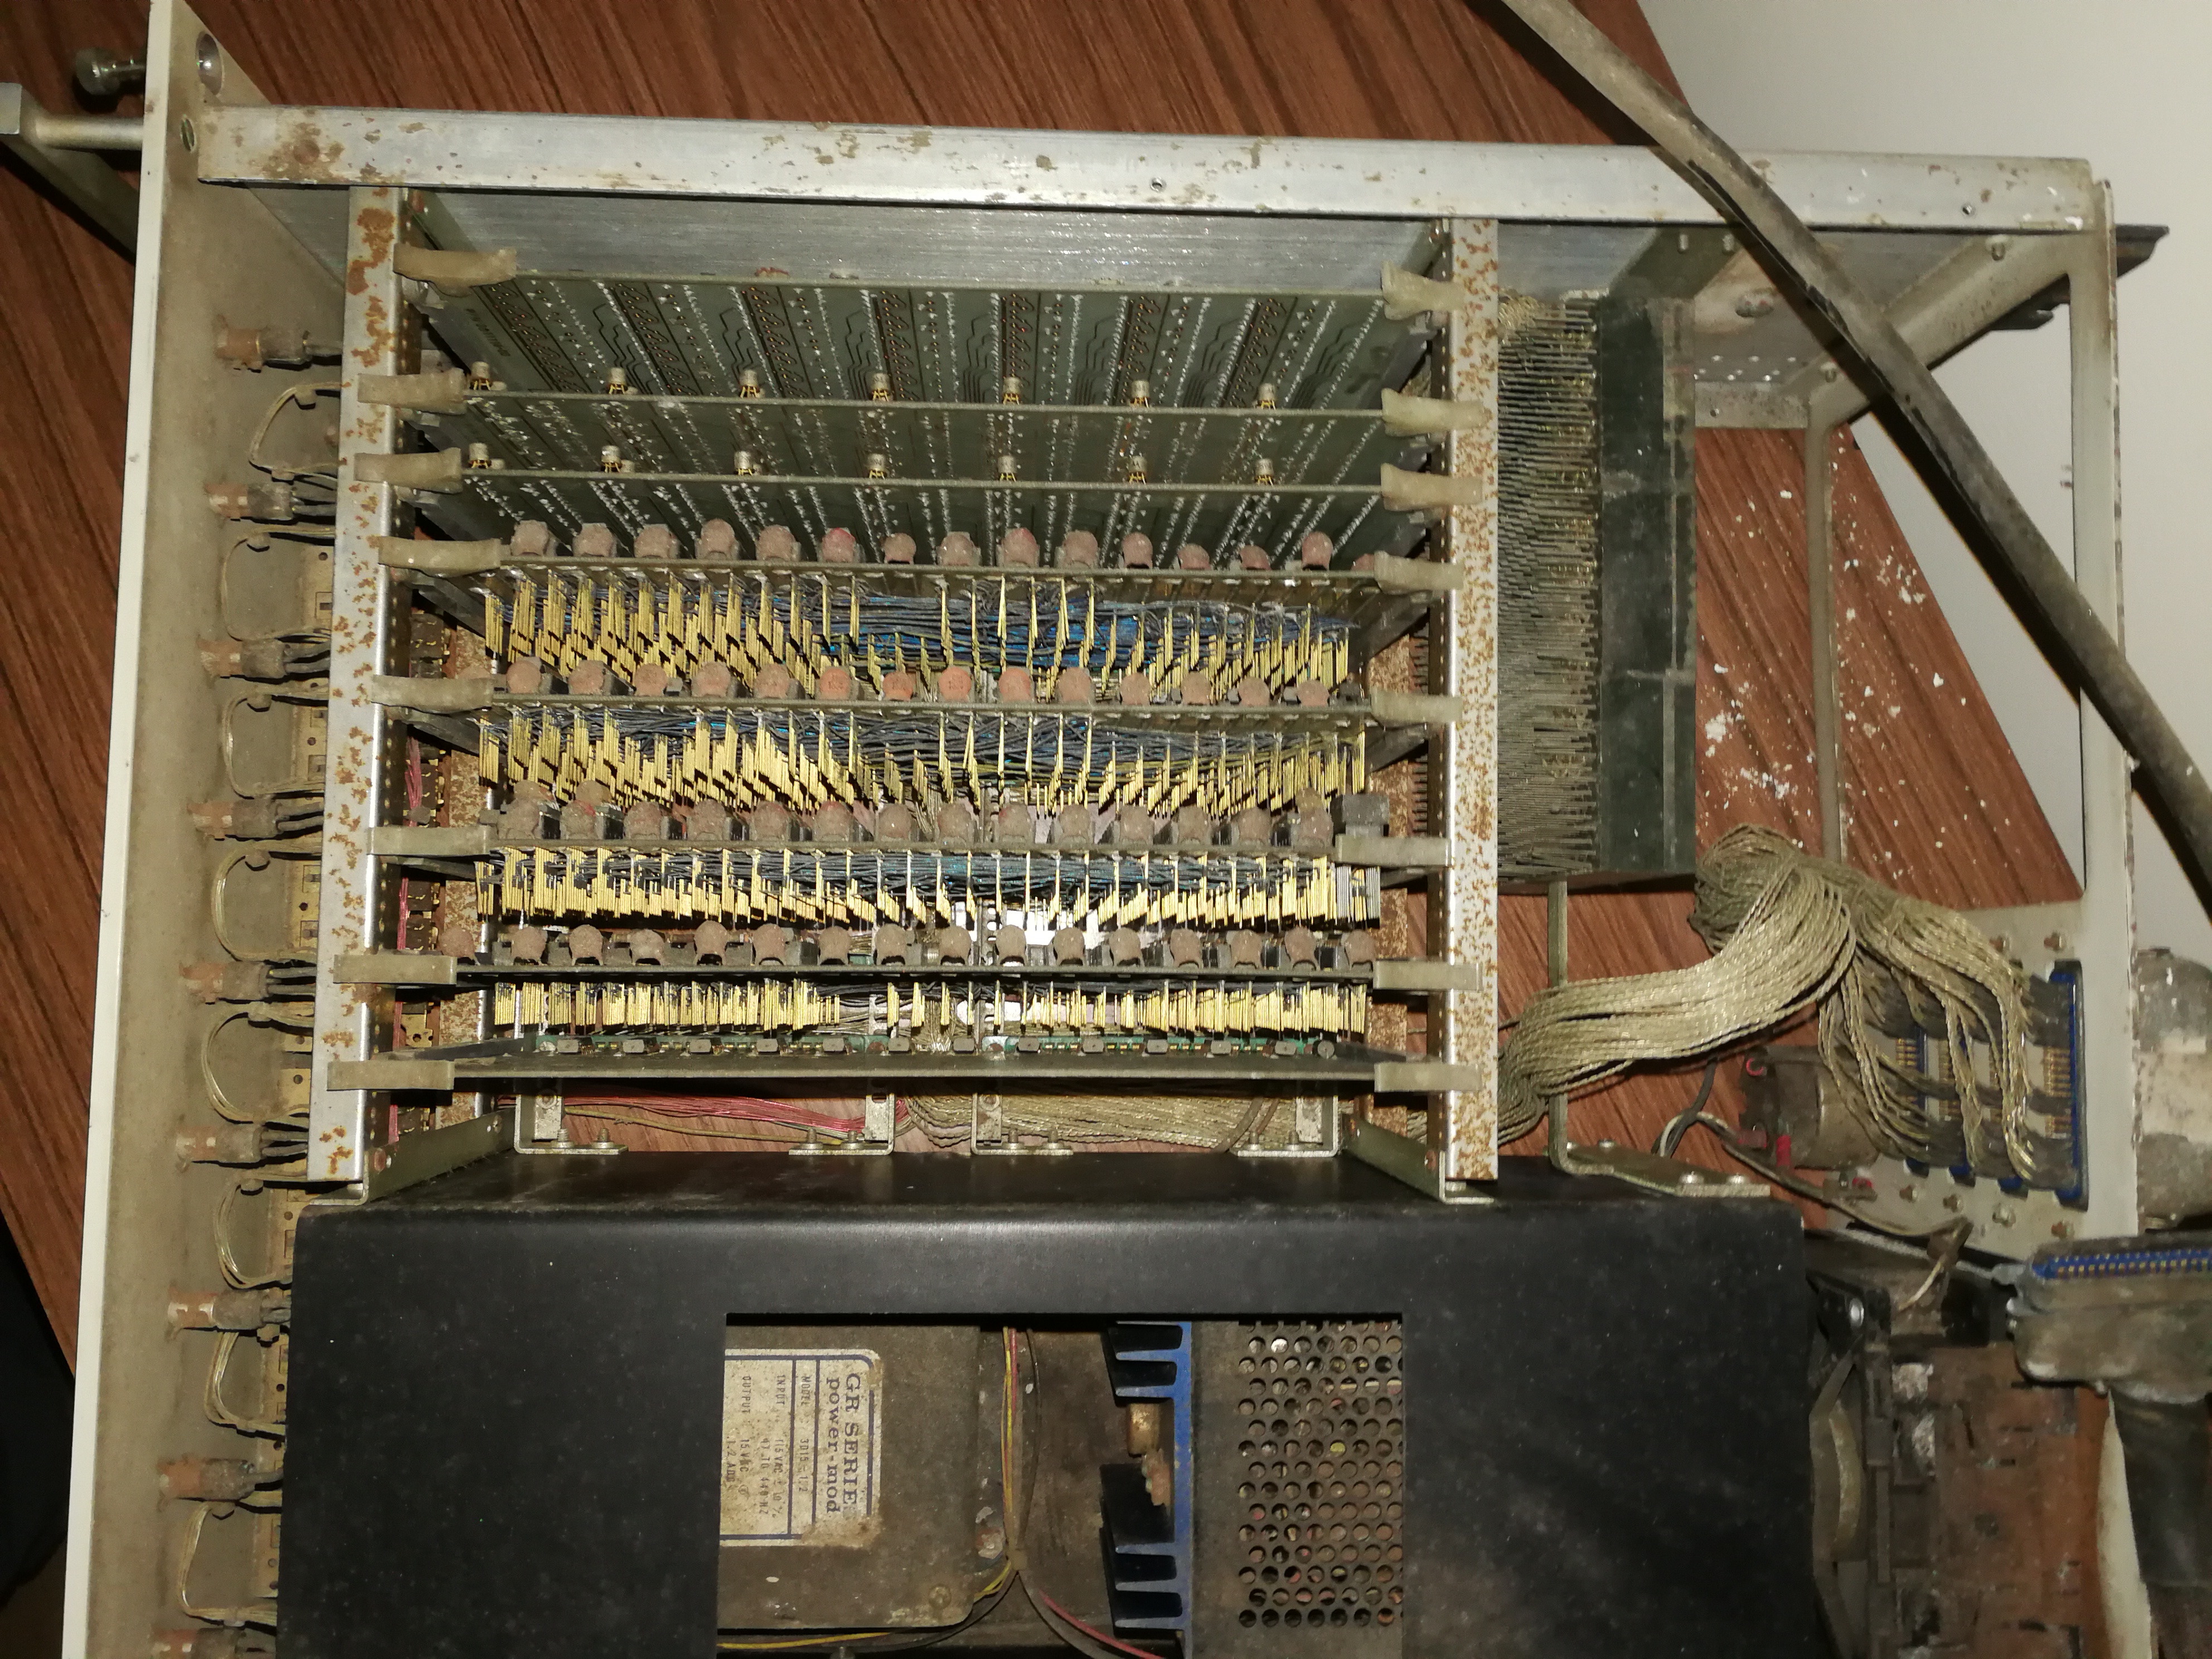 Top View of 1211 Disc Controller PDP8